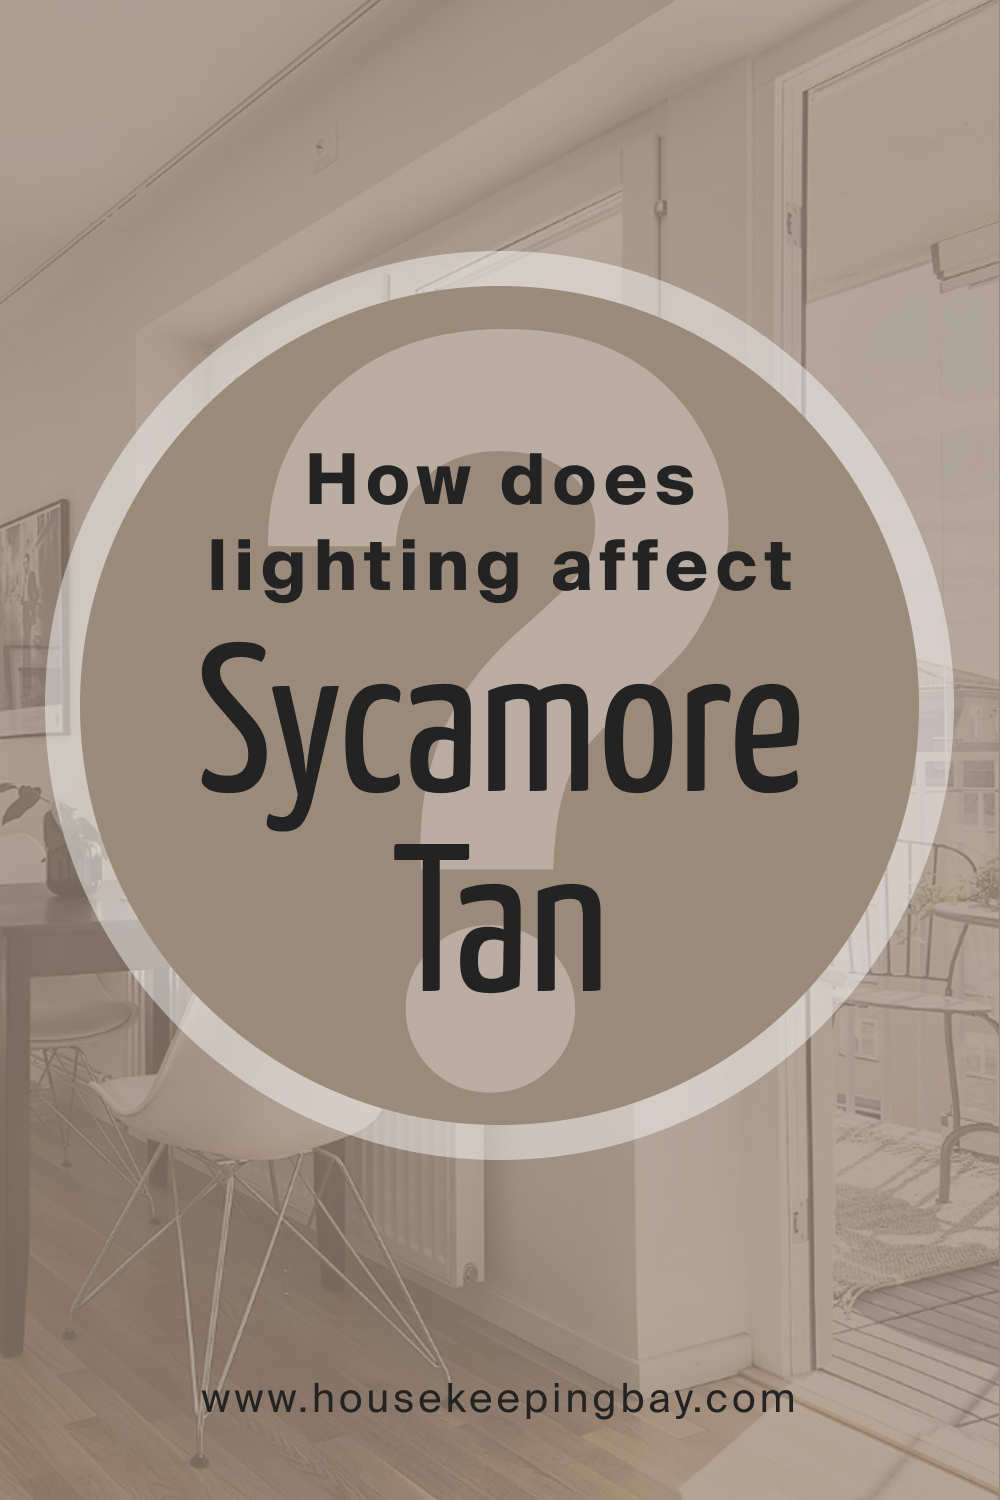 How does lighting affect SW 2855 Sycamore Tan